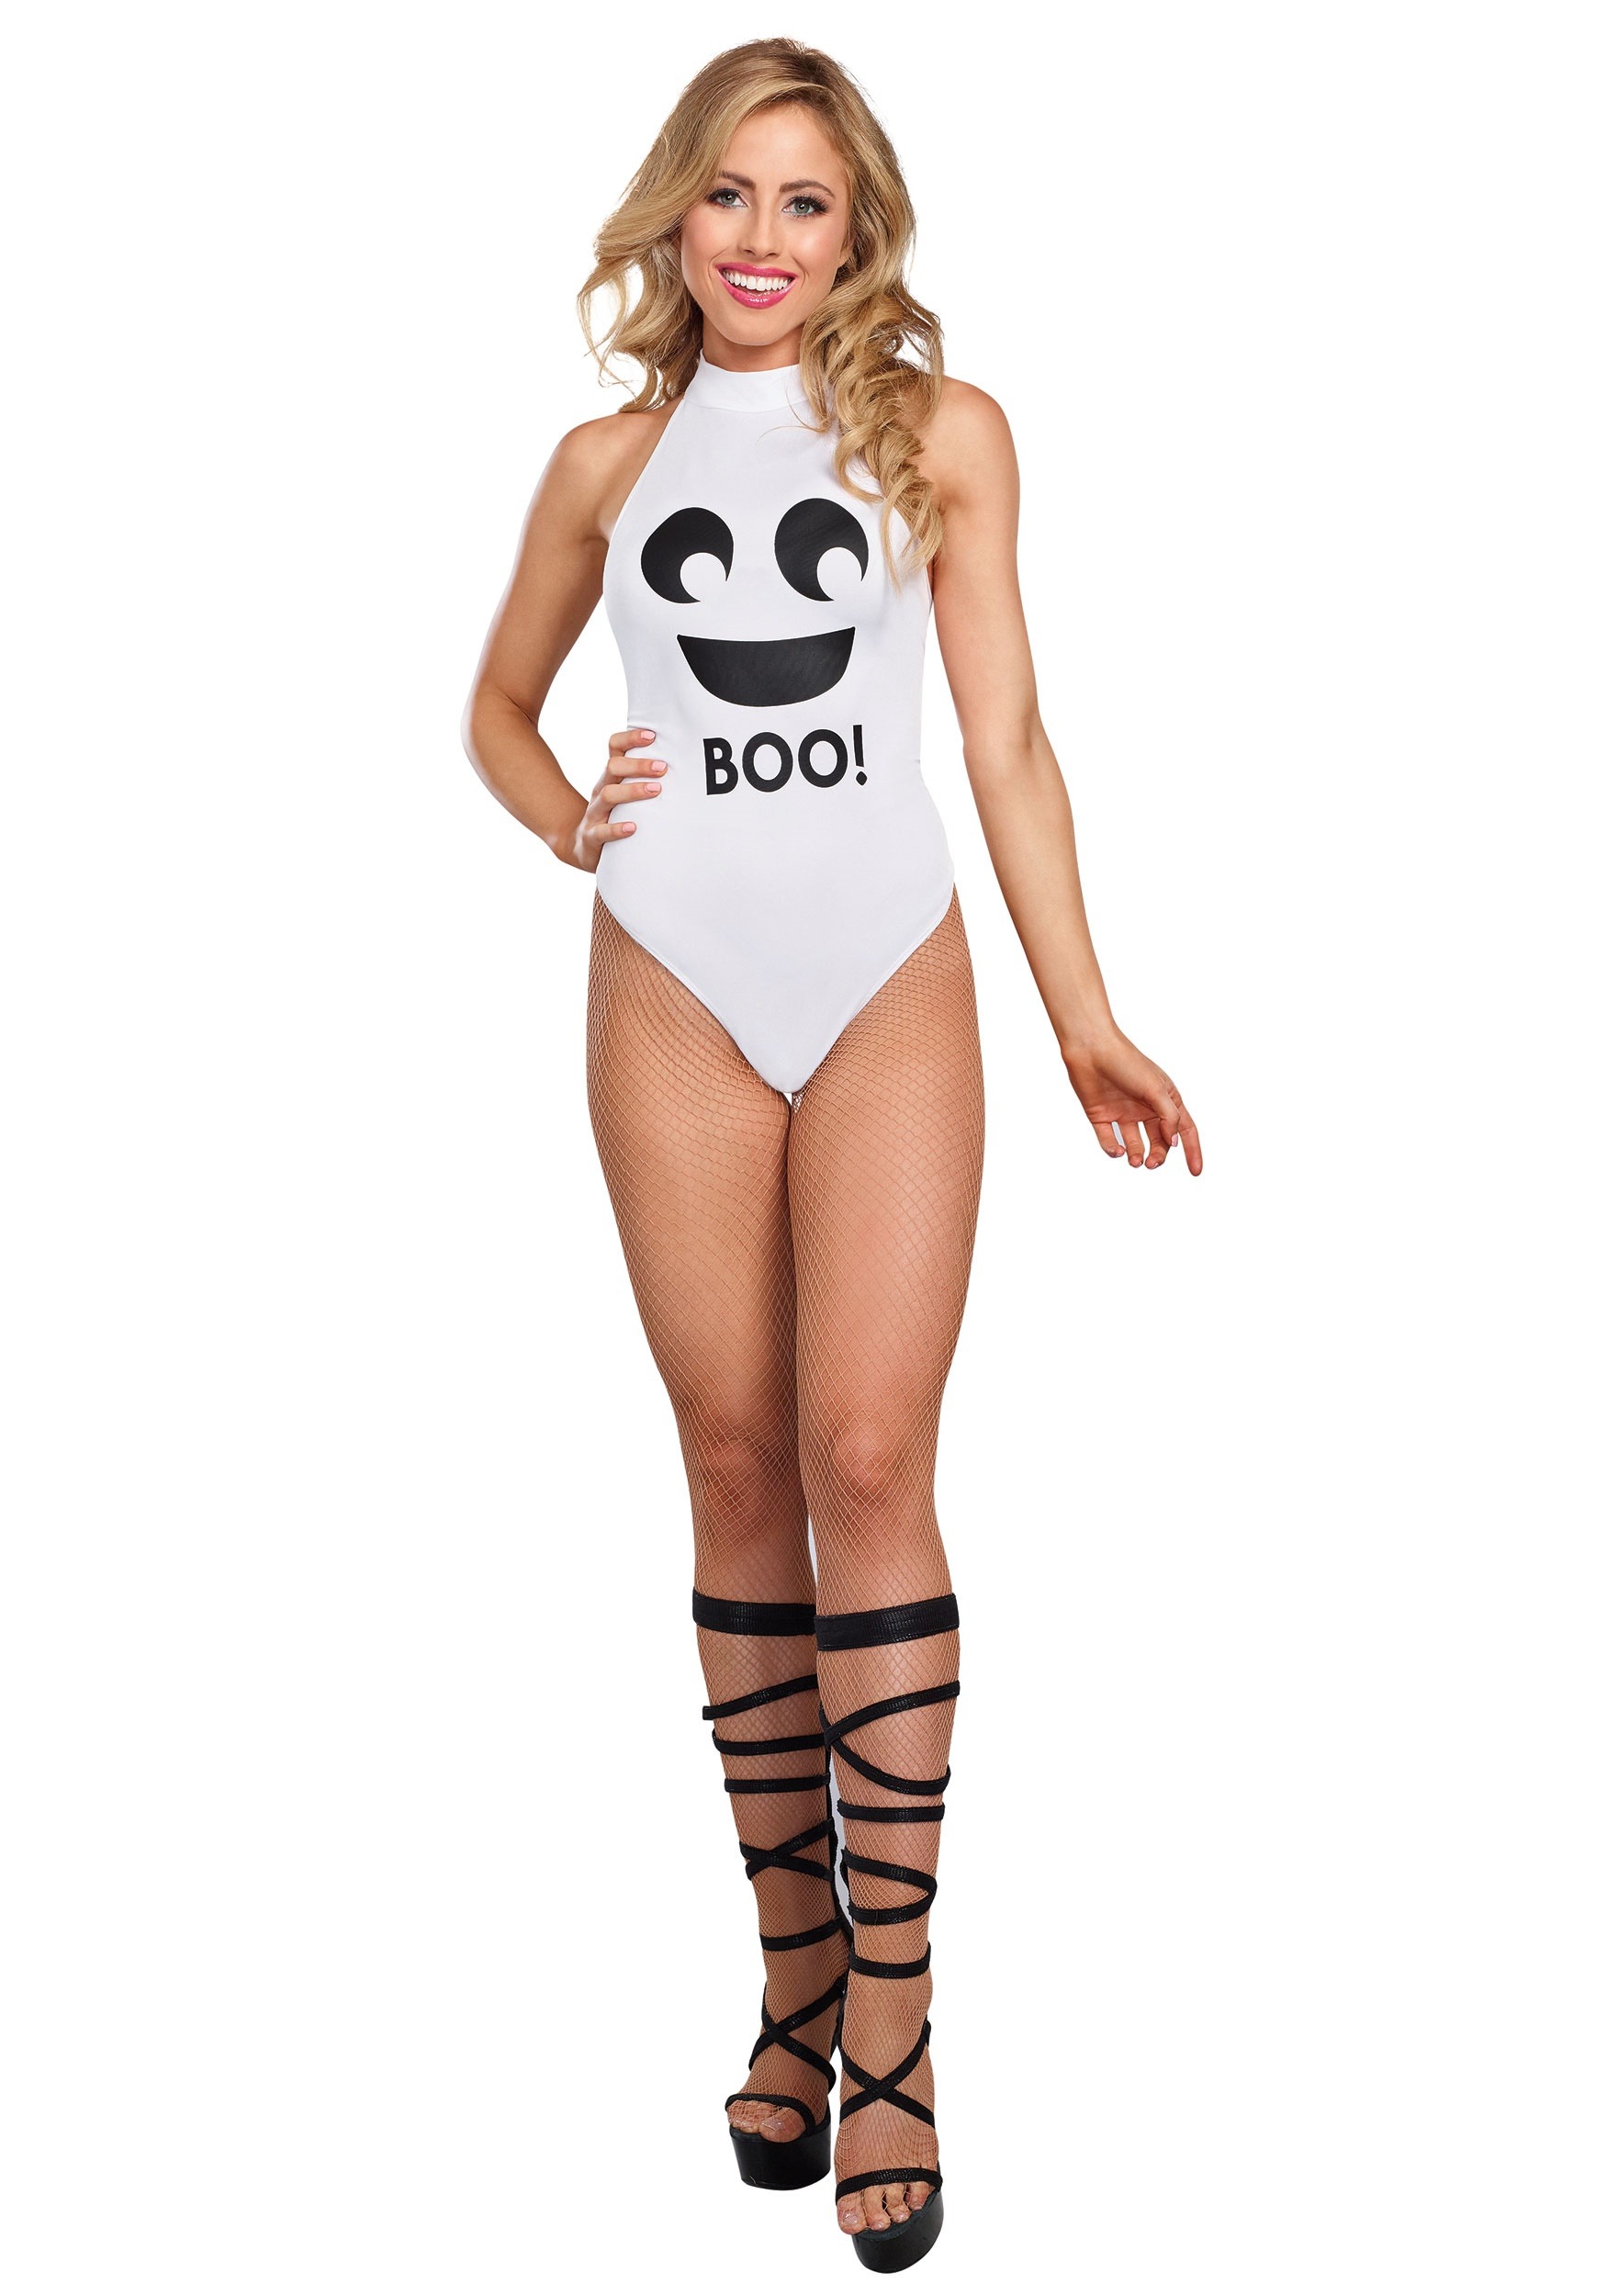 https://images.halloweencostumes.ca/products/46771/1-1/ghost-bodysuit.jpg